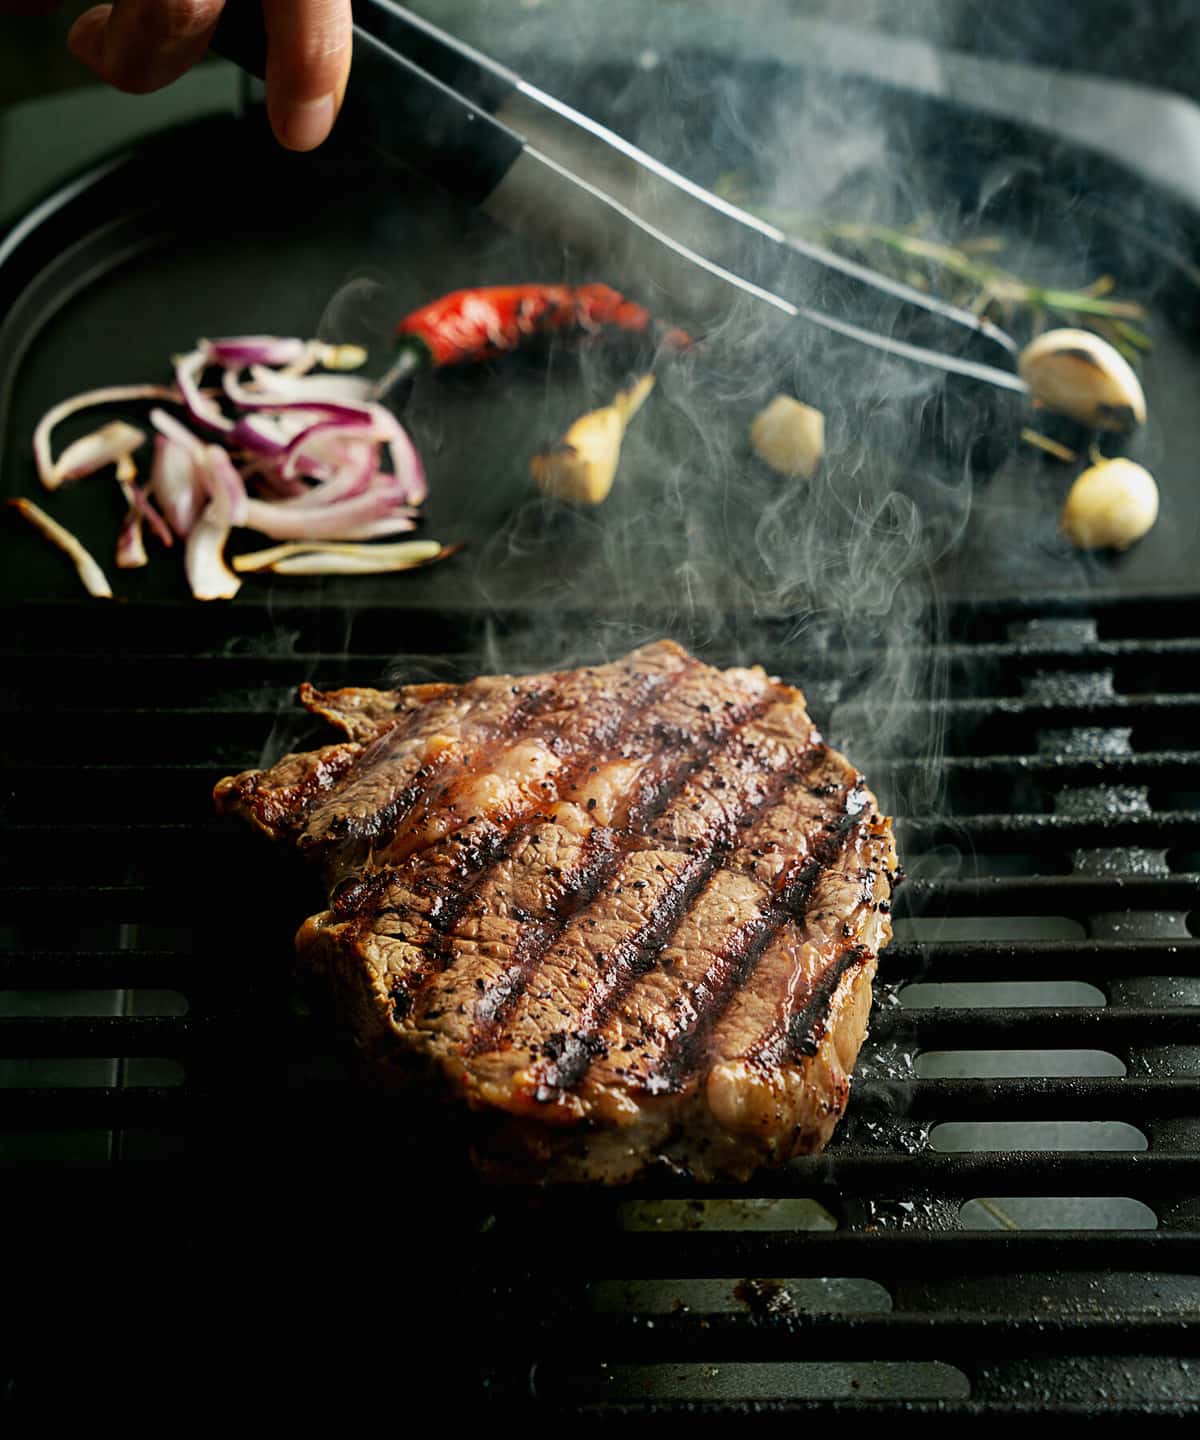 Grilling rib eye steak at home. Natural smoke. Summer grill, cooking at home concept